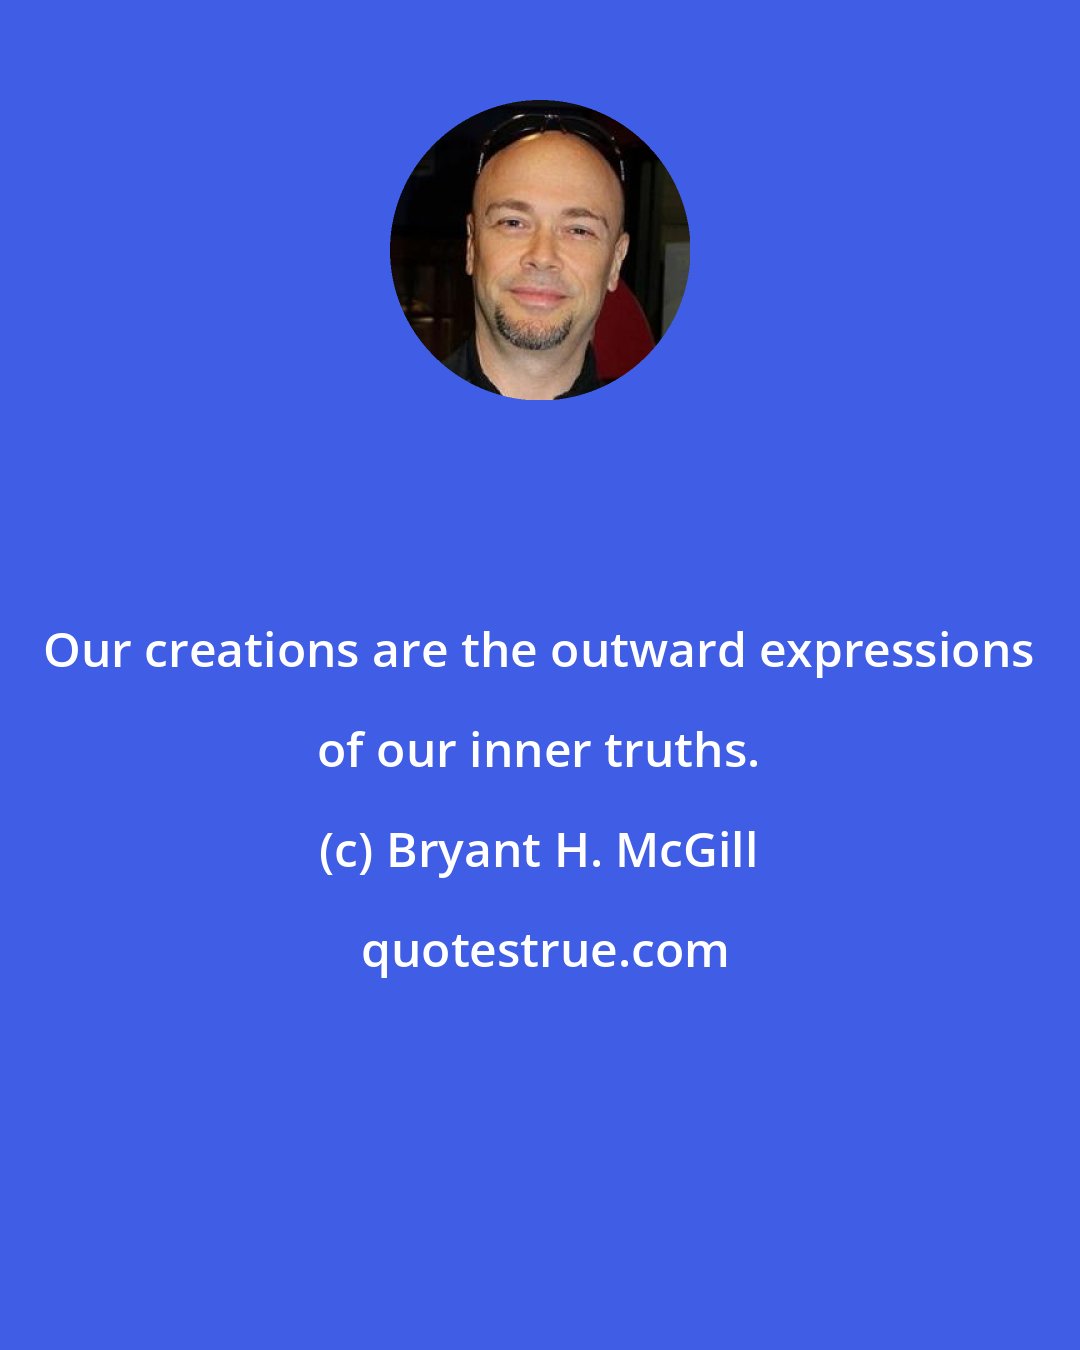 Bryant H. McGill: Our creations are the outward expressions of our inner truths.